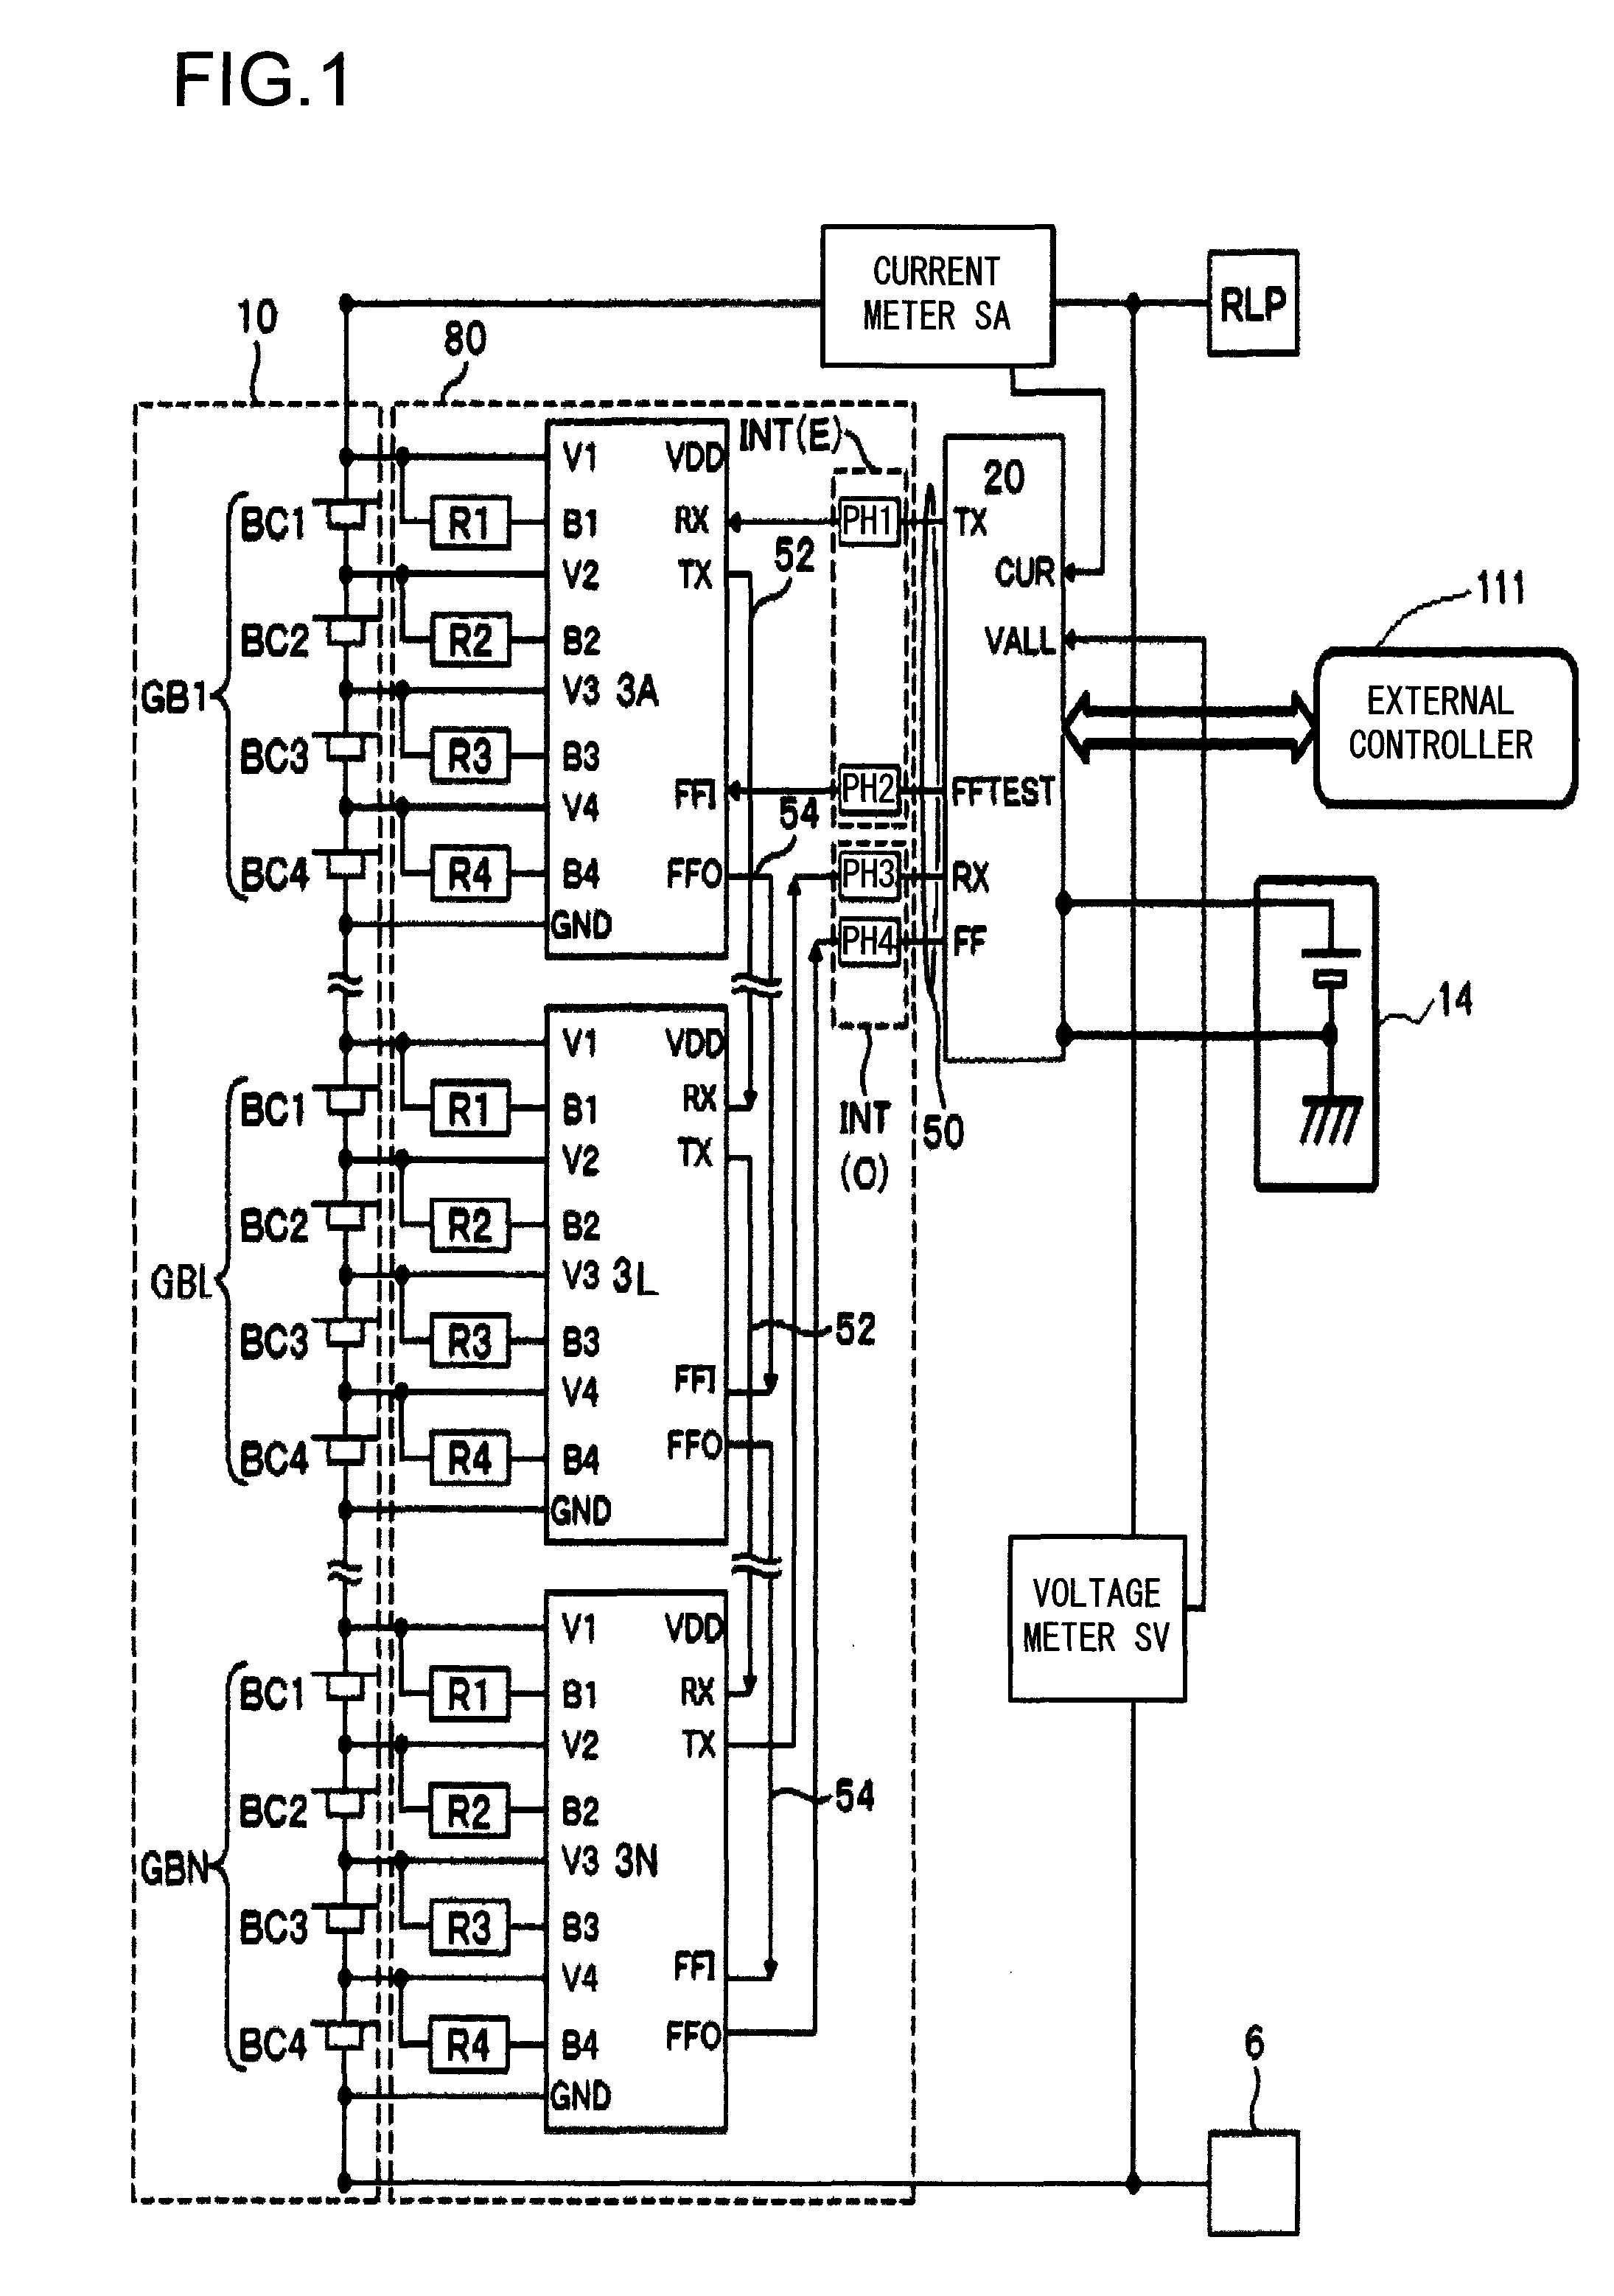 Battery management system using non-volatile memory